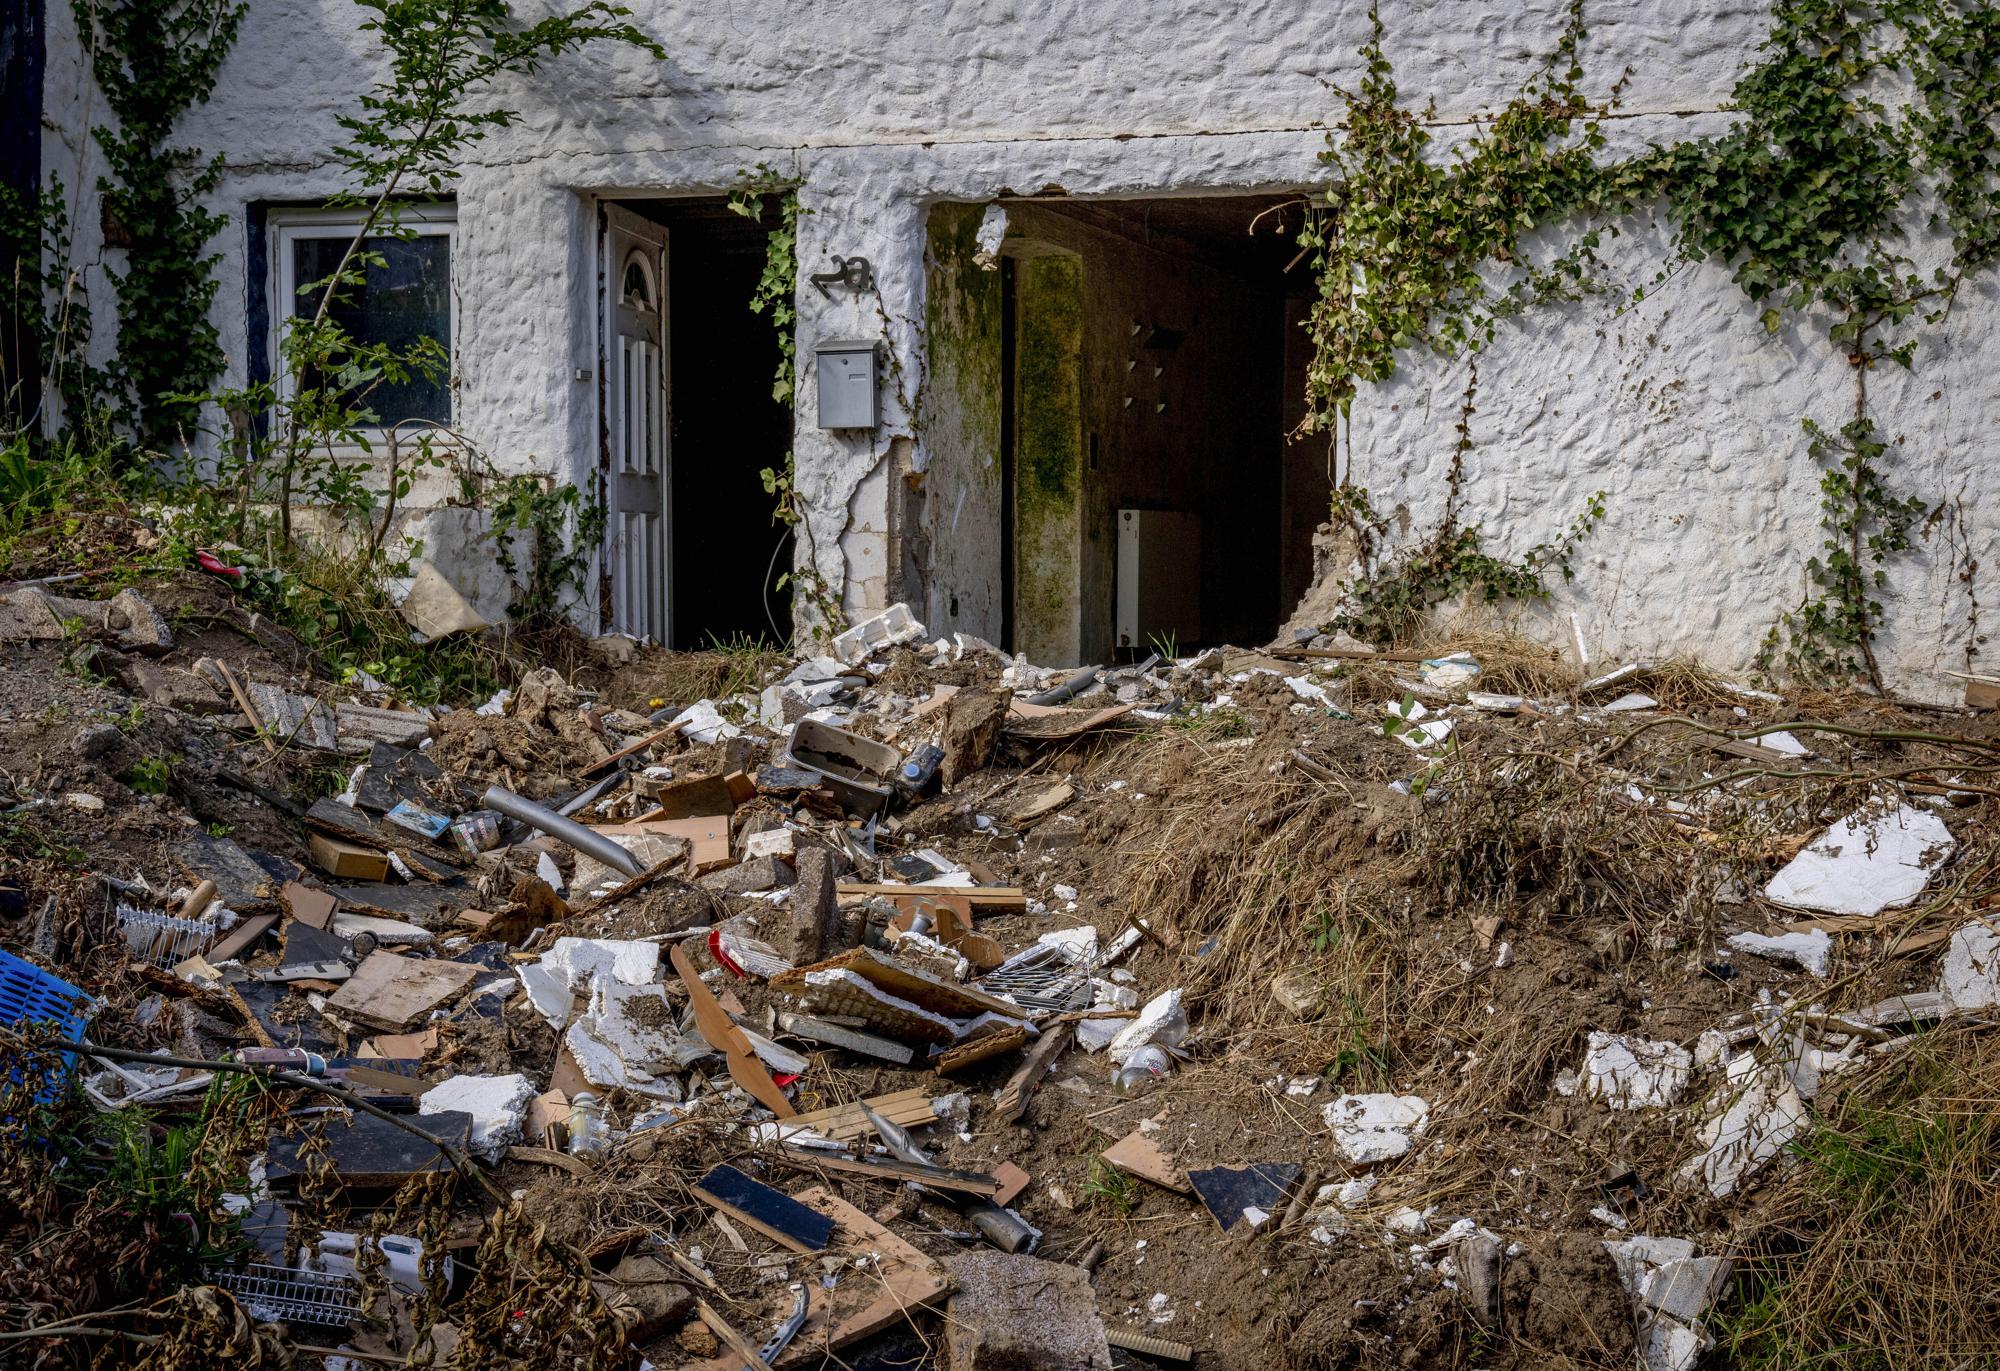 Debris from last year's flood sits in front of a destroyed house in the village of Schuld in the Ahrtal valley, Germany, Tuesday, July 5, 2022. Floods caused by heavy rain hit the region on July 14, 2021 causing the death of about 130 people. (AP Photo/Michael Probst)